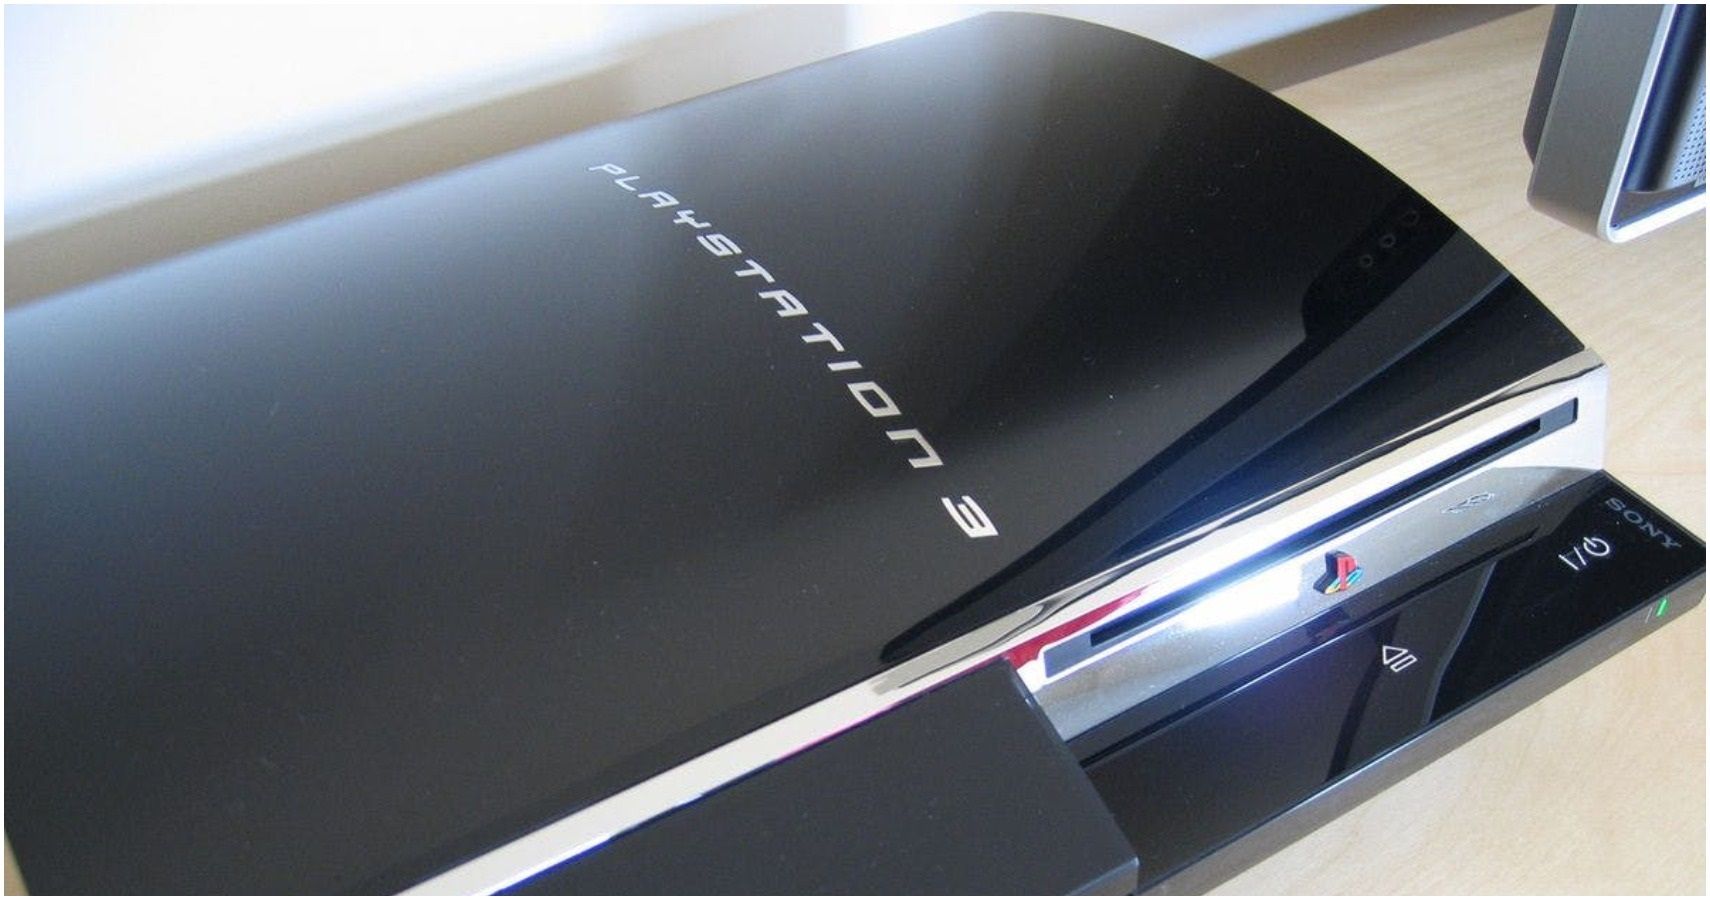 Owners Of Phat PlayStation 3 Have A Month Left To Claim OtherOS Settlement